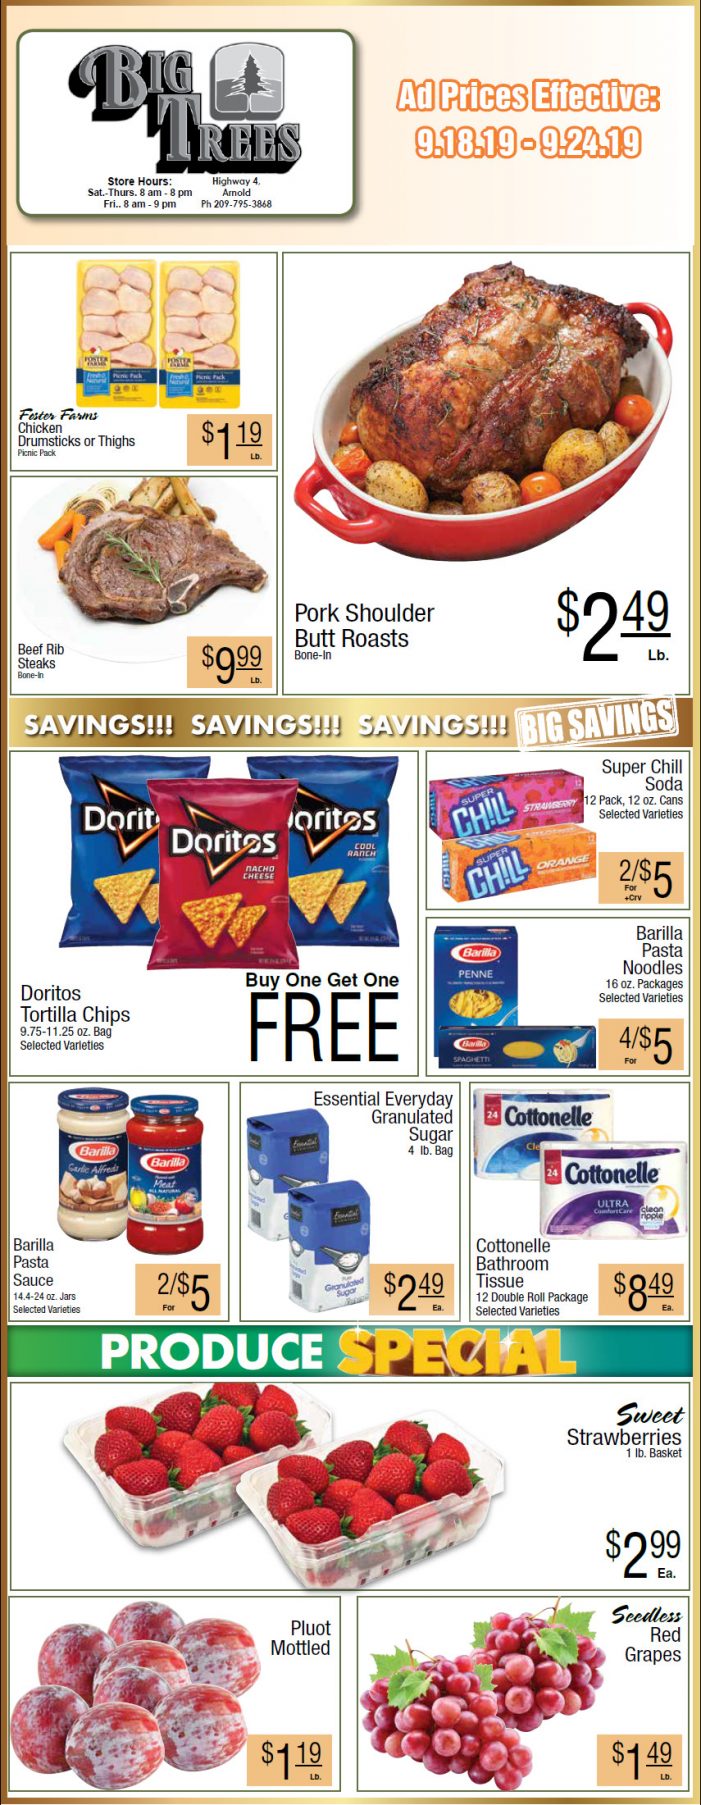 Big Trees Market Weekly Ad & Grocery Specials Through September 24th